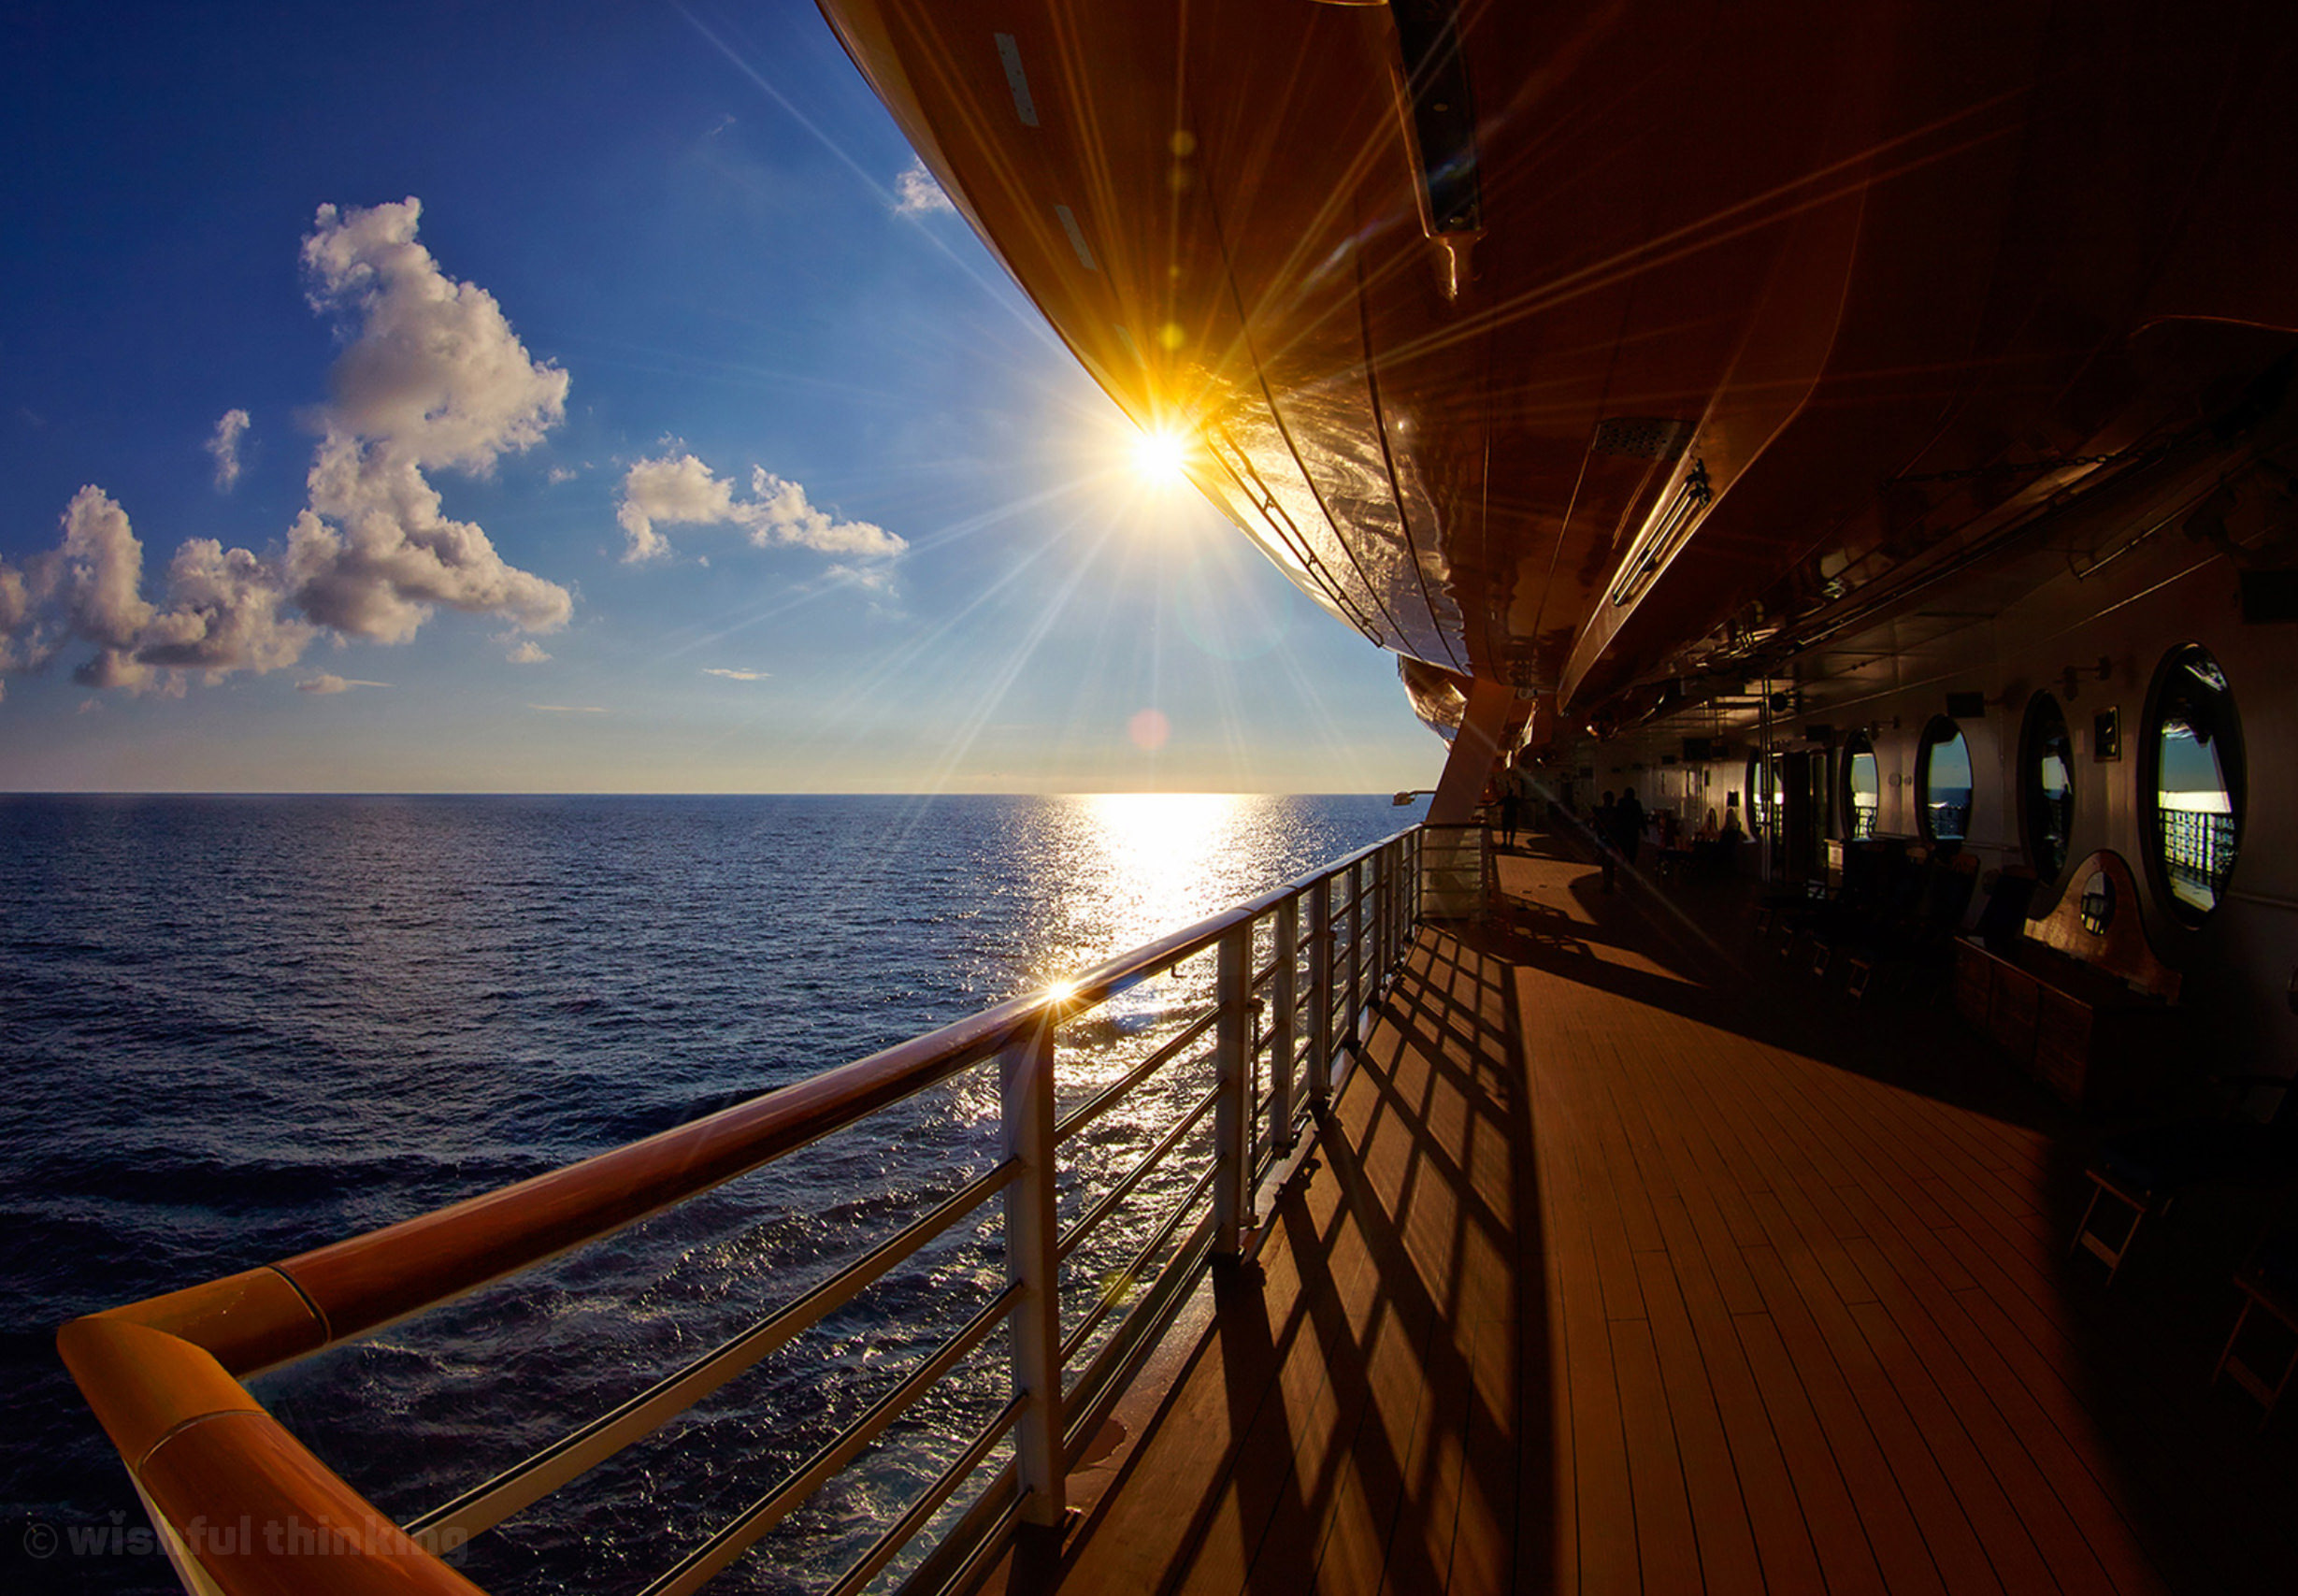 Disney Cruise Line ships soak up the golden afternoon sun as a spectacular Disney cruise sails to Castaway Cay in the Bahamas